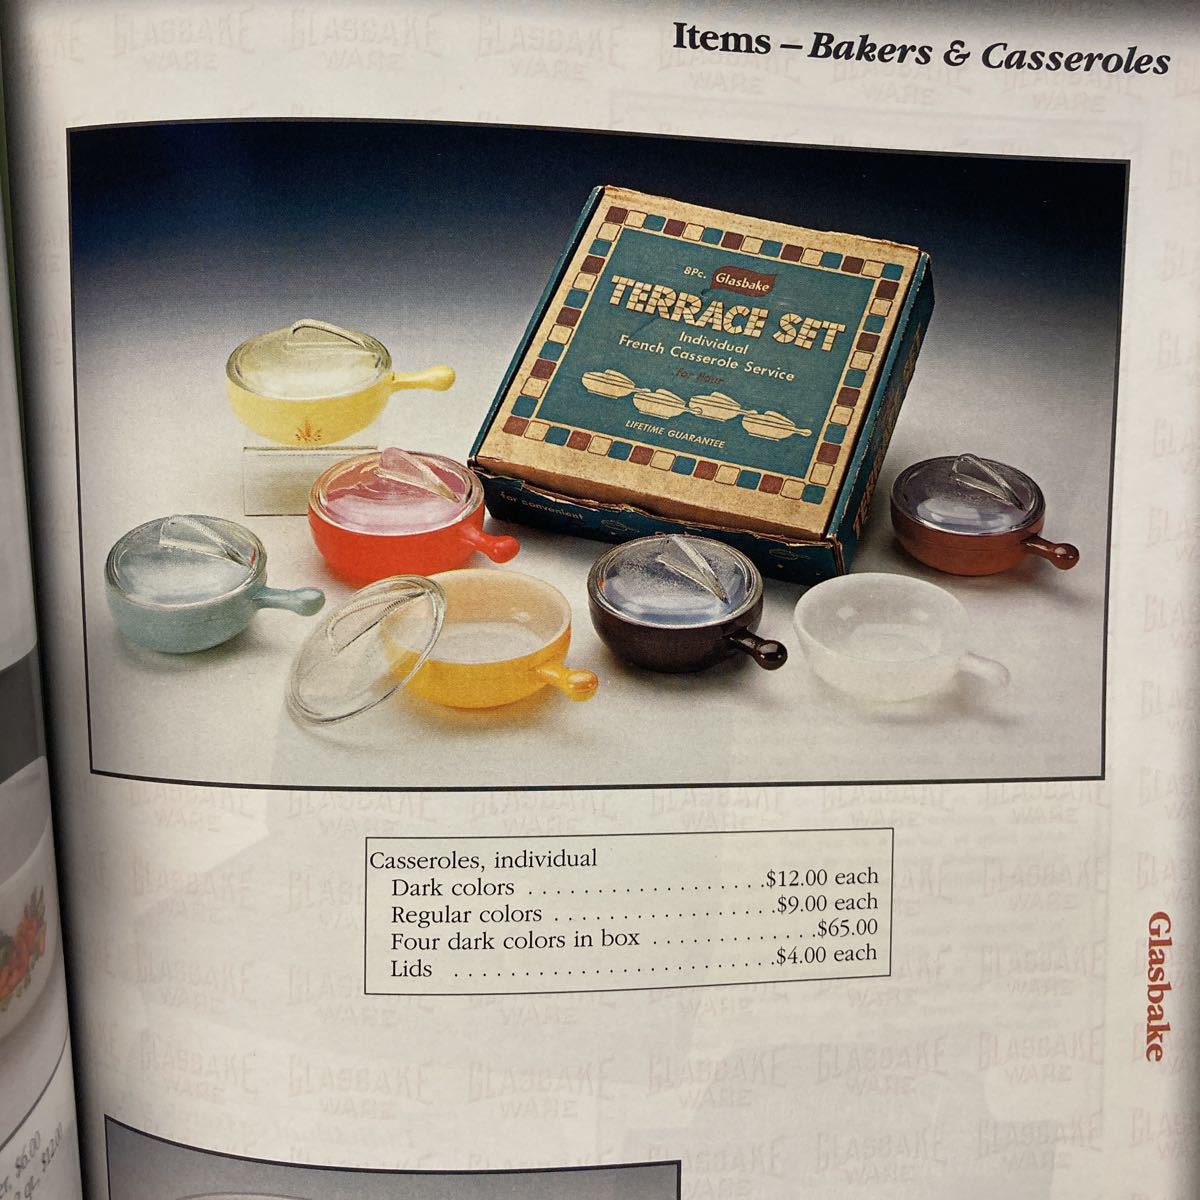  foreign book oven wear antique tableware book@ Pyrex Fire King glass Bay k370 jpy sending America Vintage catalog book